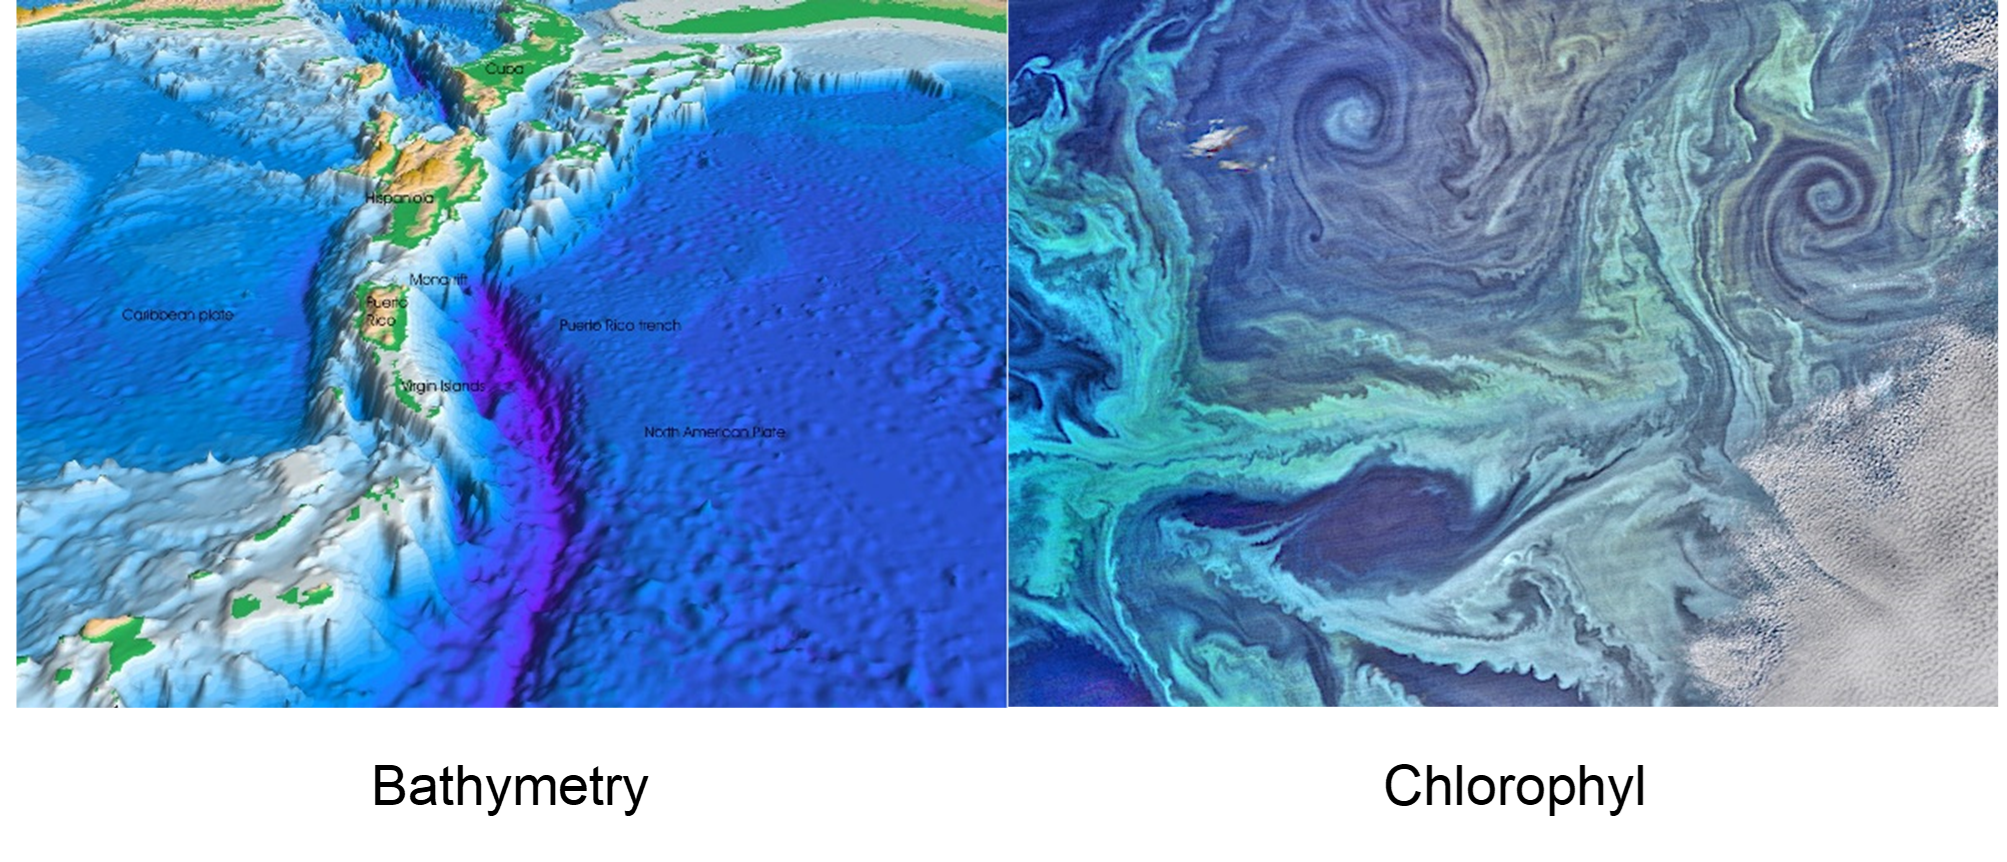 Bathymetry (from the Greek “metro” - meaning measuring - and “bathos” - meaning depth) and its terrestrial equivalent hypsometry (“hypsos” - meaning altitude/height/elevation) are probably the first environmental variables to be reliably added to most SDMs. They are more accurately measured than other variables, they are biologically influential for most organisms, and, importantly, they are static in ecological time scales. By comparison, variables such as phytoplankton distribution might be accurately known via remote sensing and might even be more biologically relevant, since many organisms rely more directly on primary production than depth. However, they are less frequently encountered in SDMs because they are dynamic. This trait means that phytoplankton maps must either be averaged into aggregate layers (potentially losing their biological relevance) or treated as successive frames in an animation of synchronous distribution data. Images: Wikipedia Creative Commons.